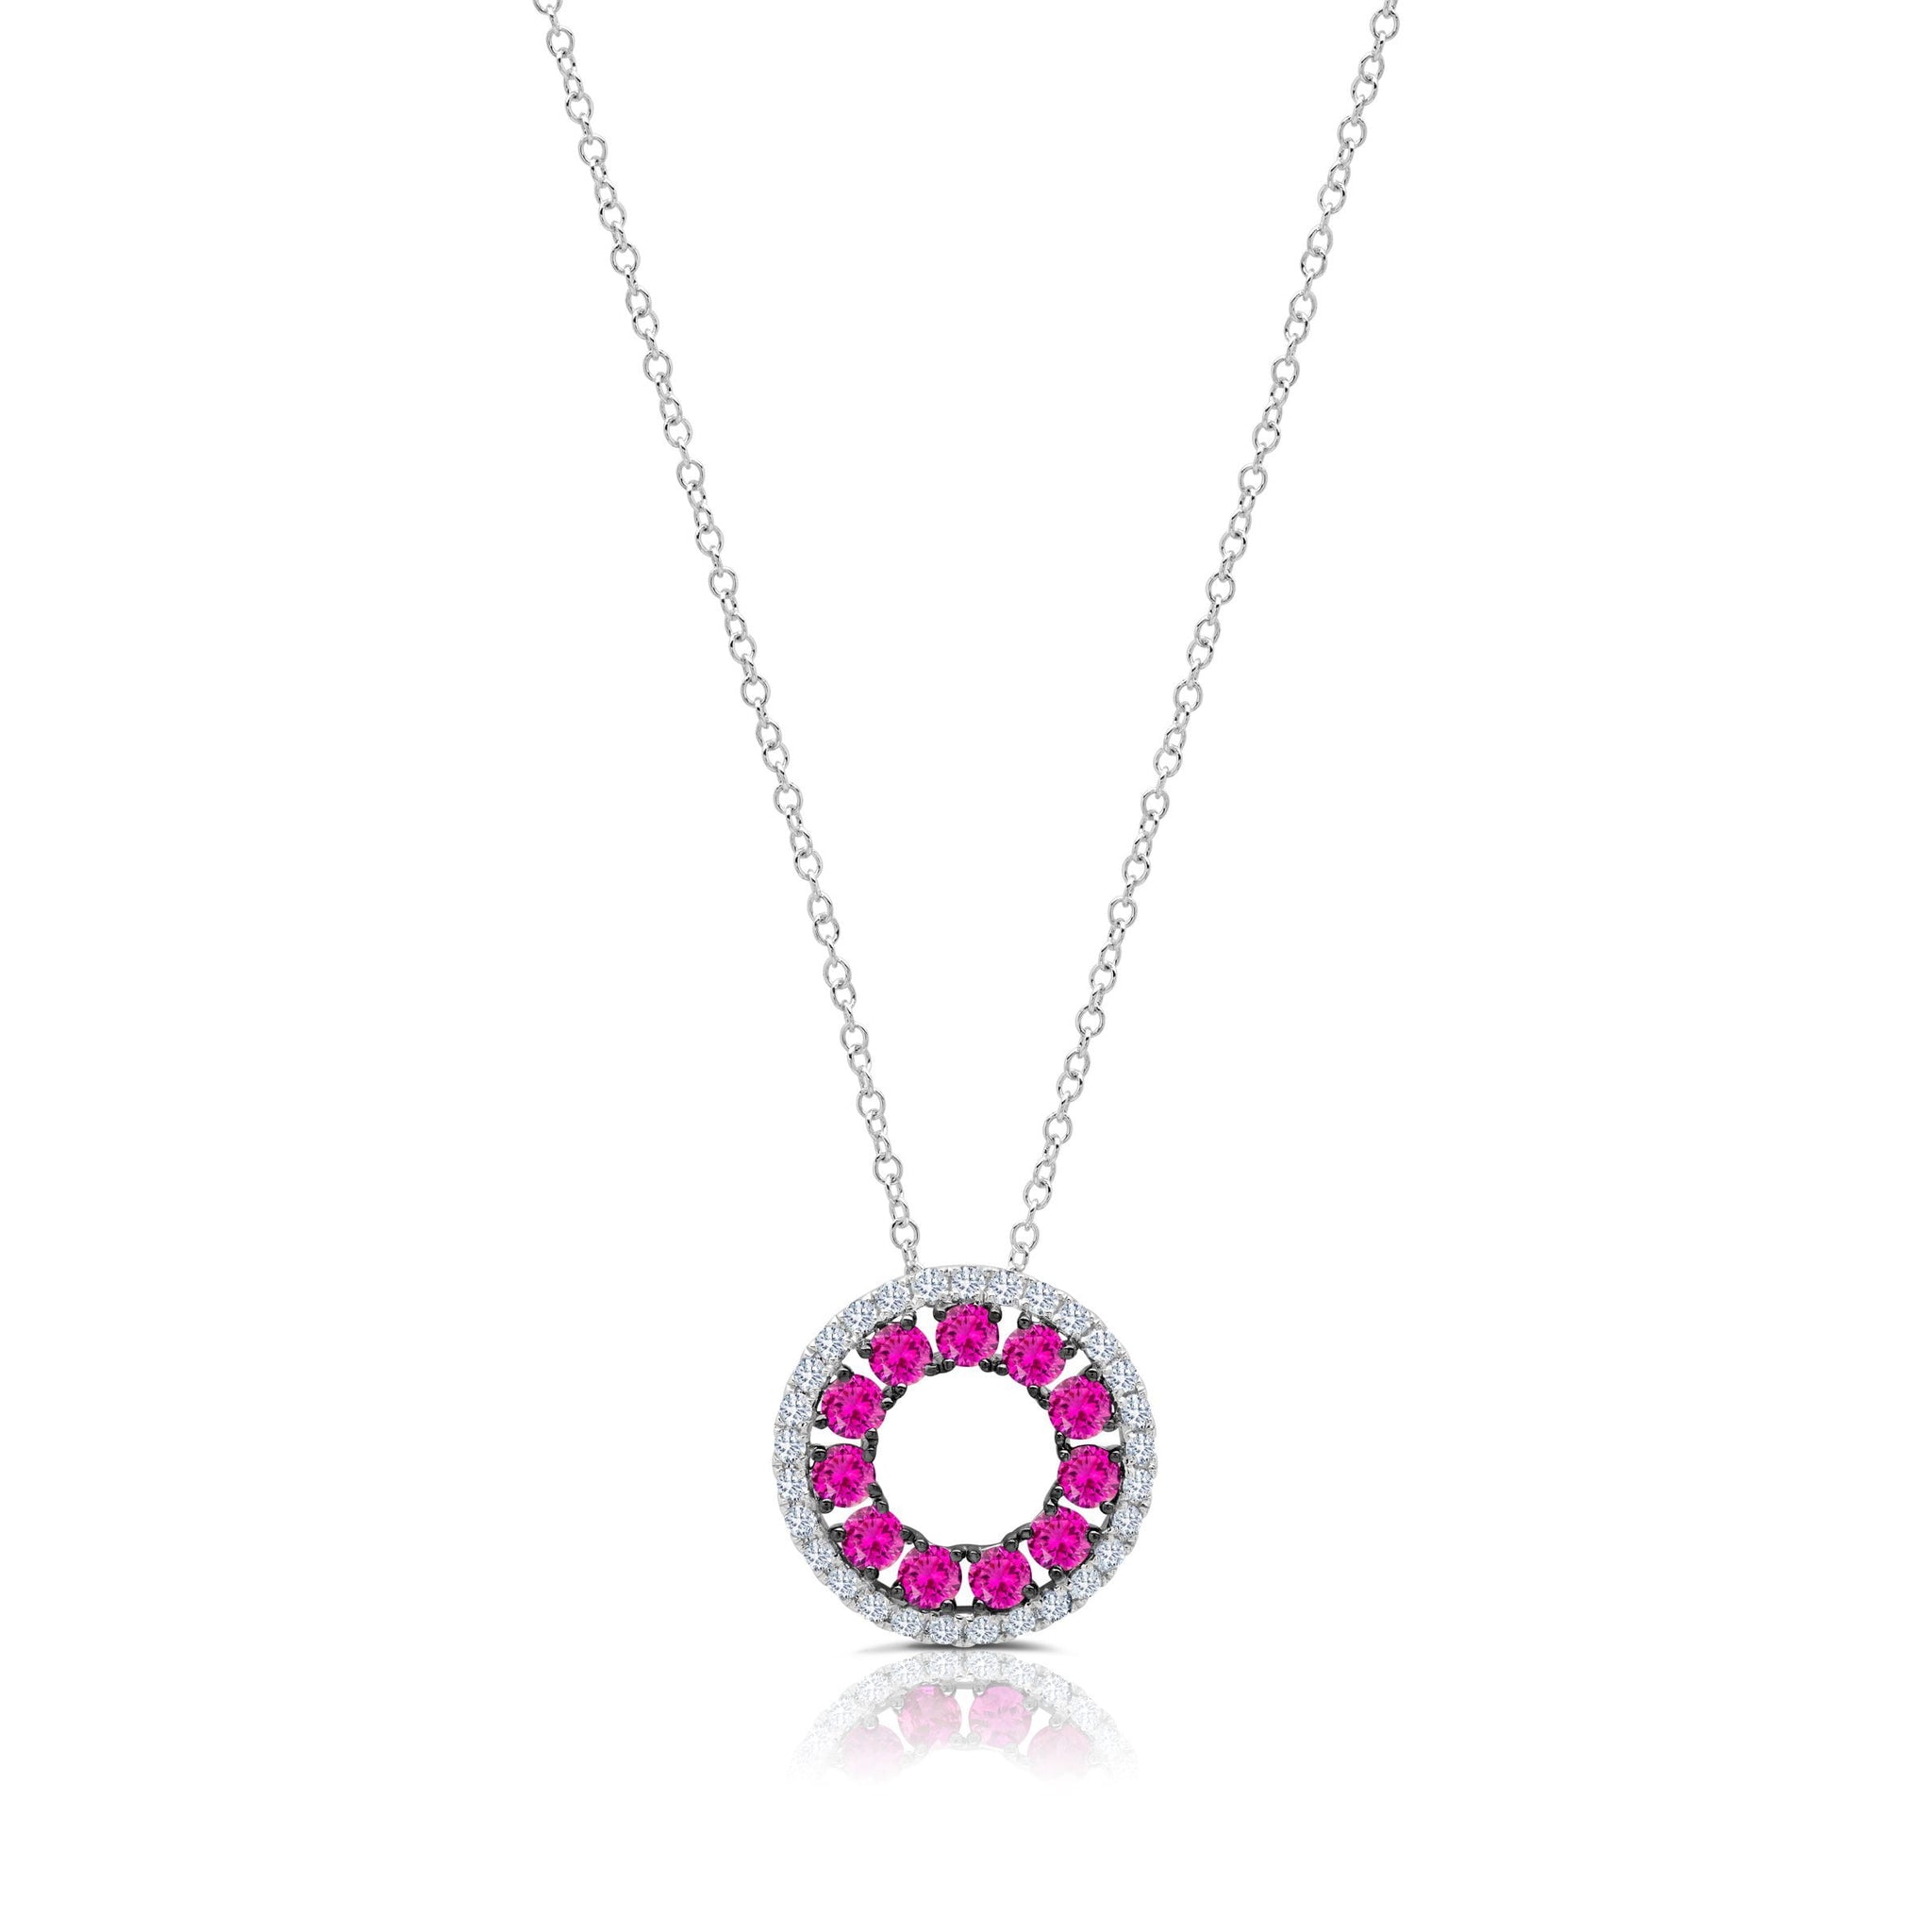 Graziela Gems - Necklace - Ruby 3 Sided Circle Necklace - 